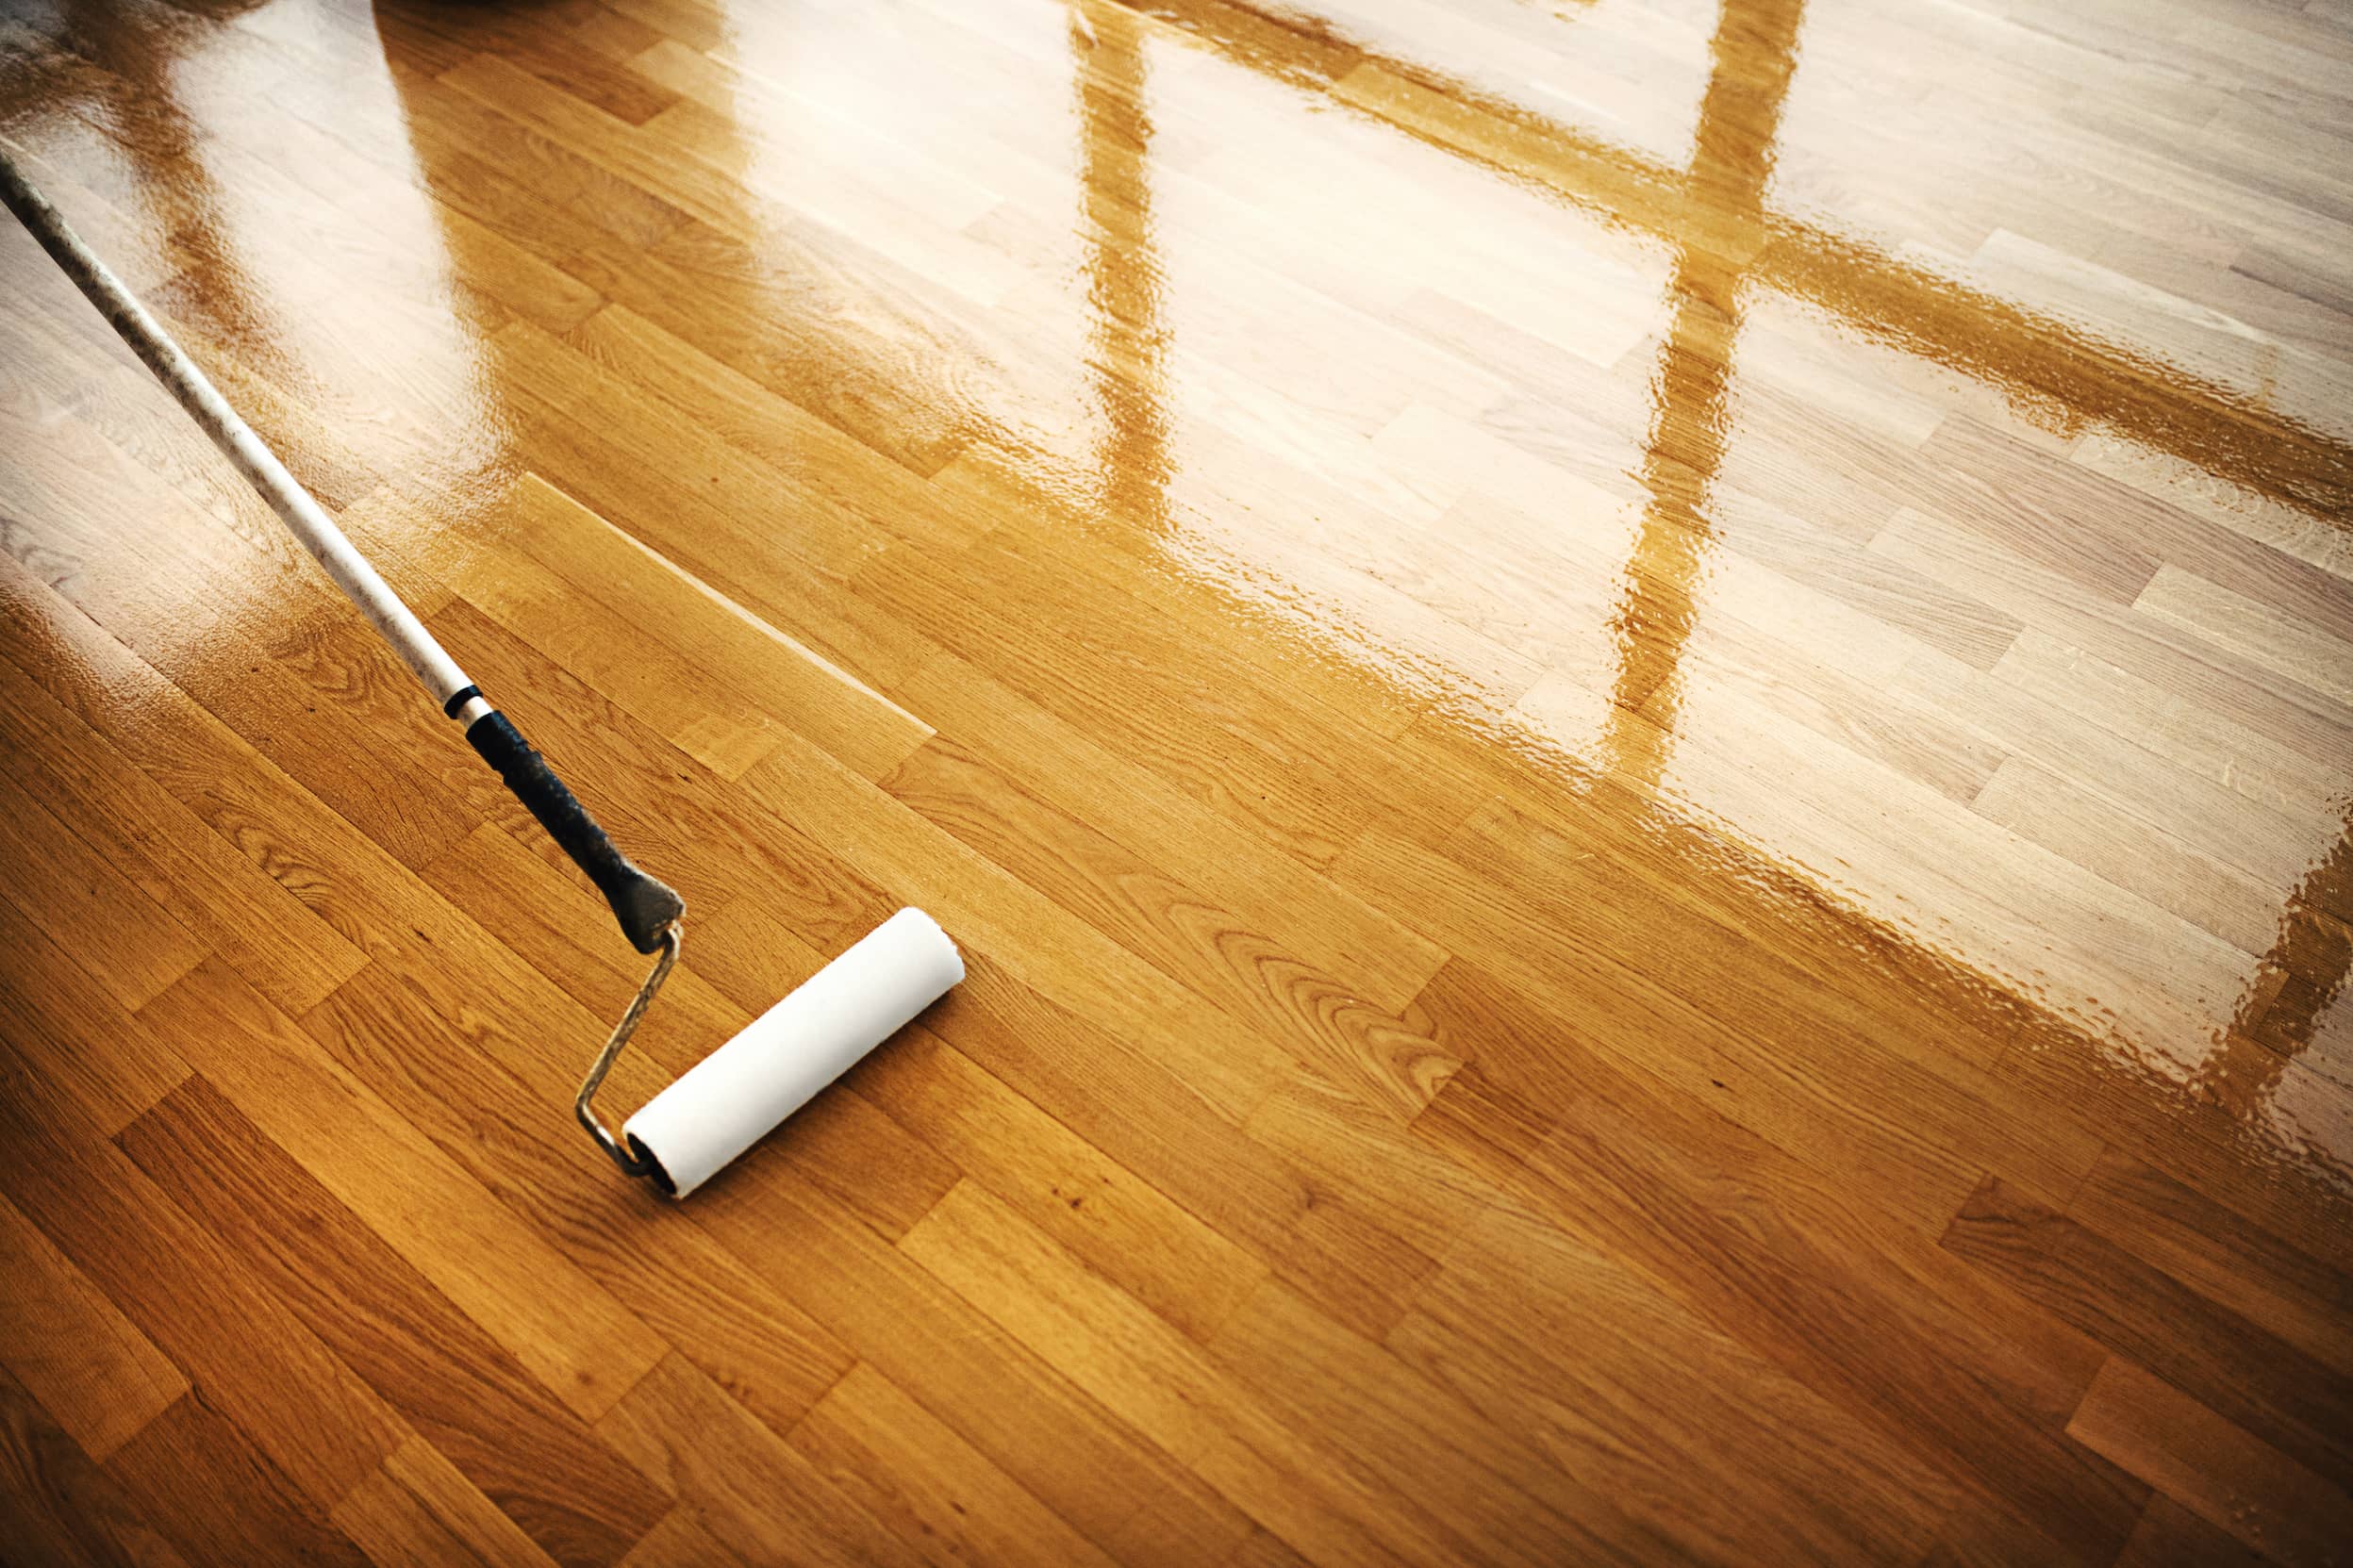 Preservation Tips for Taking Care of Your Wood Floors